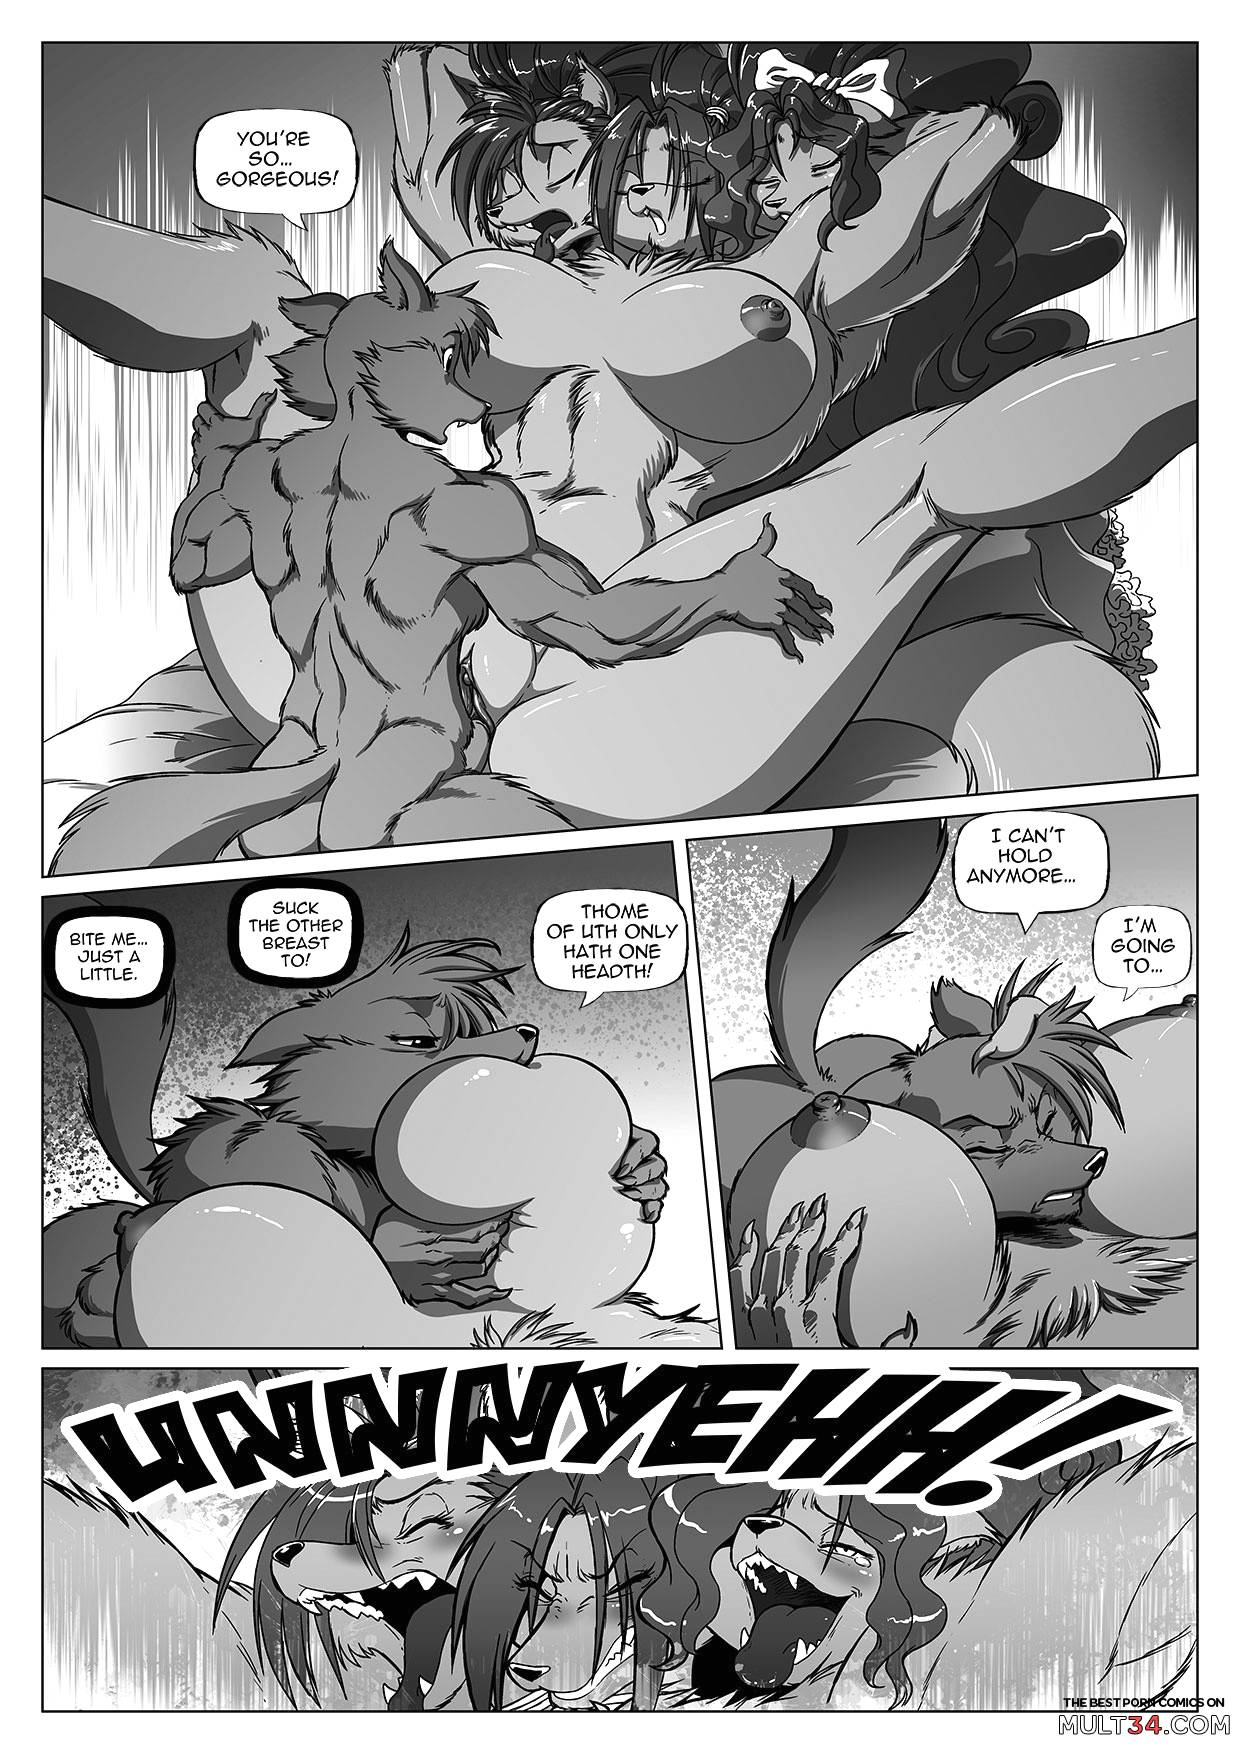 Spinnerette NSFW 1 page 9